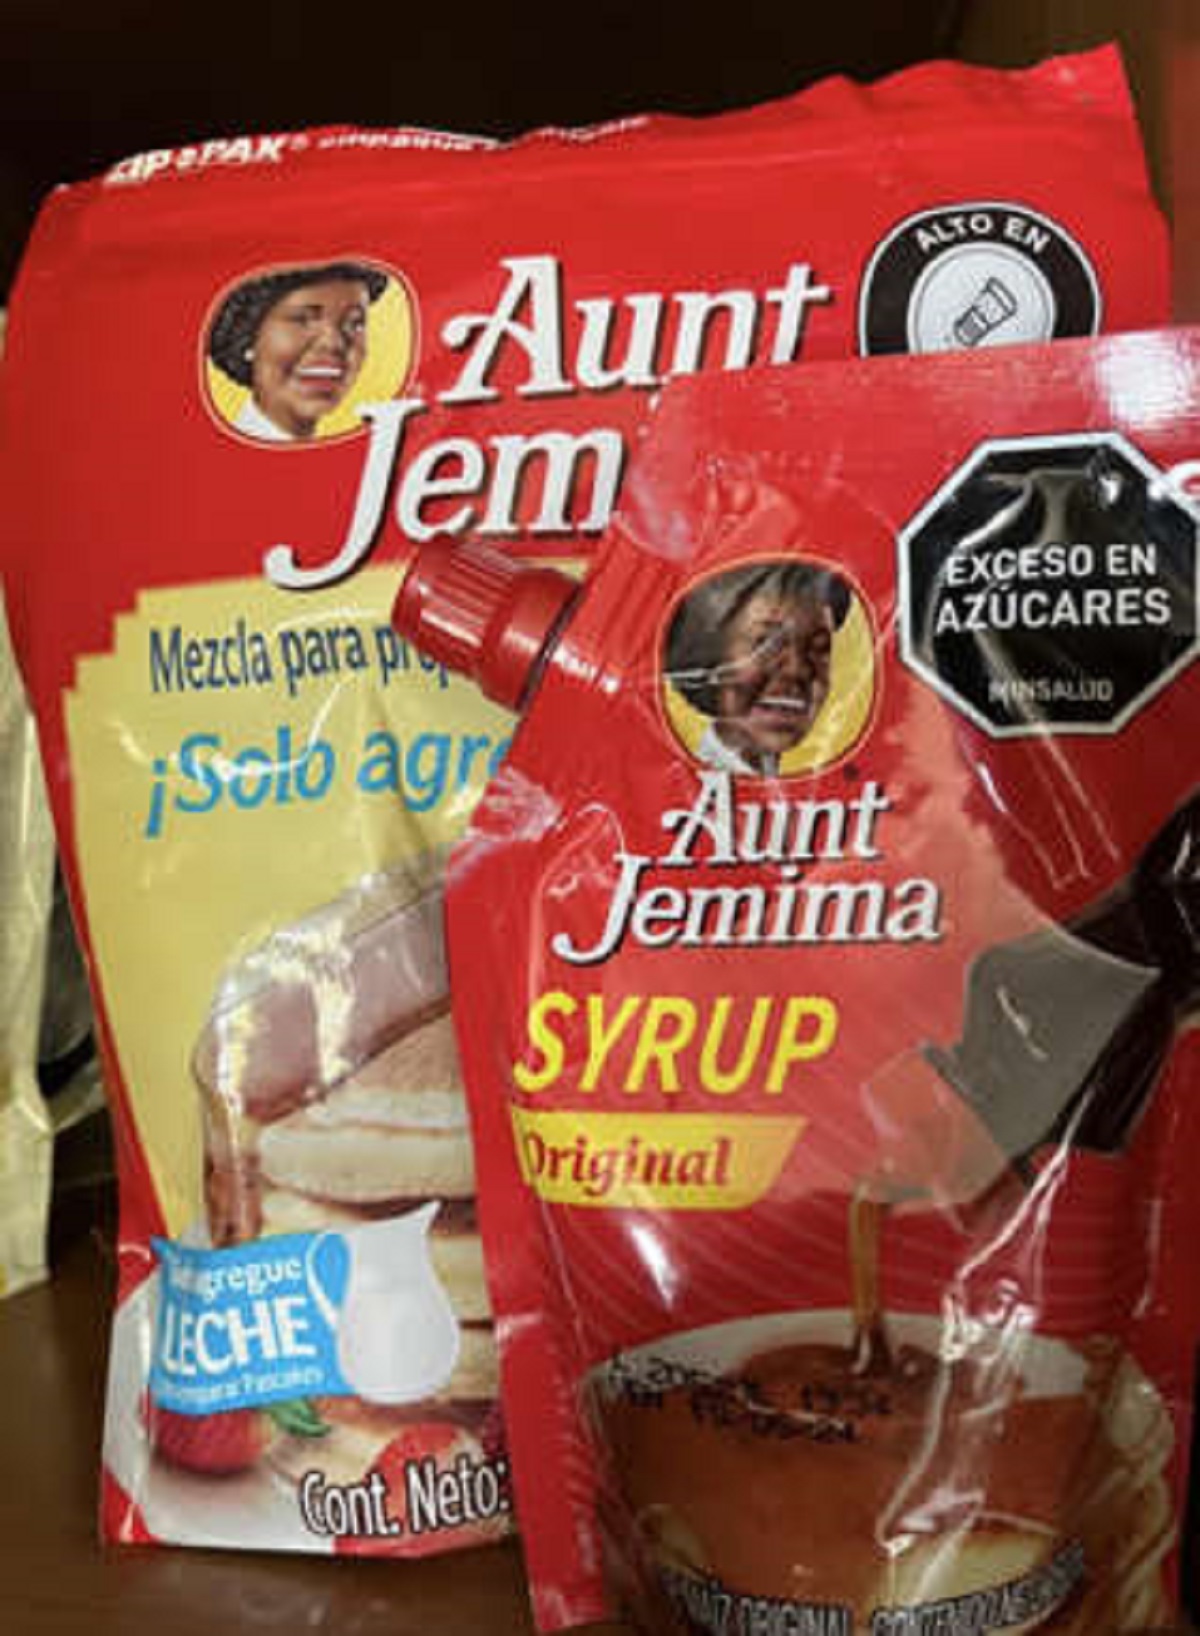 Your brand got cancelled in the US? The Aunt Jemima brand still exists in Colombia.